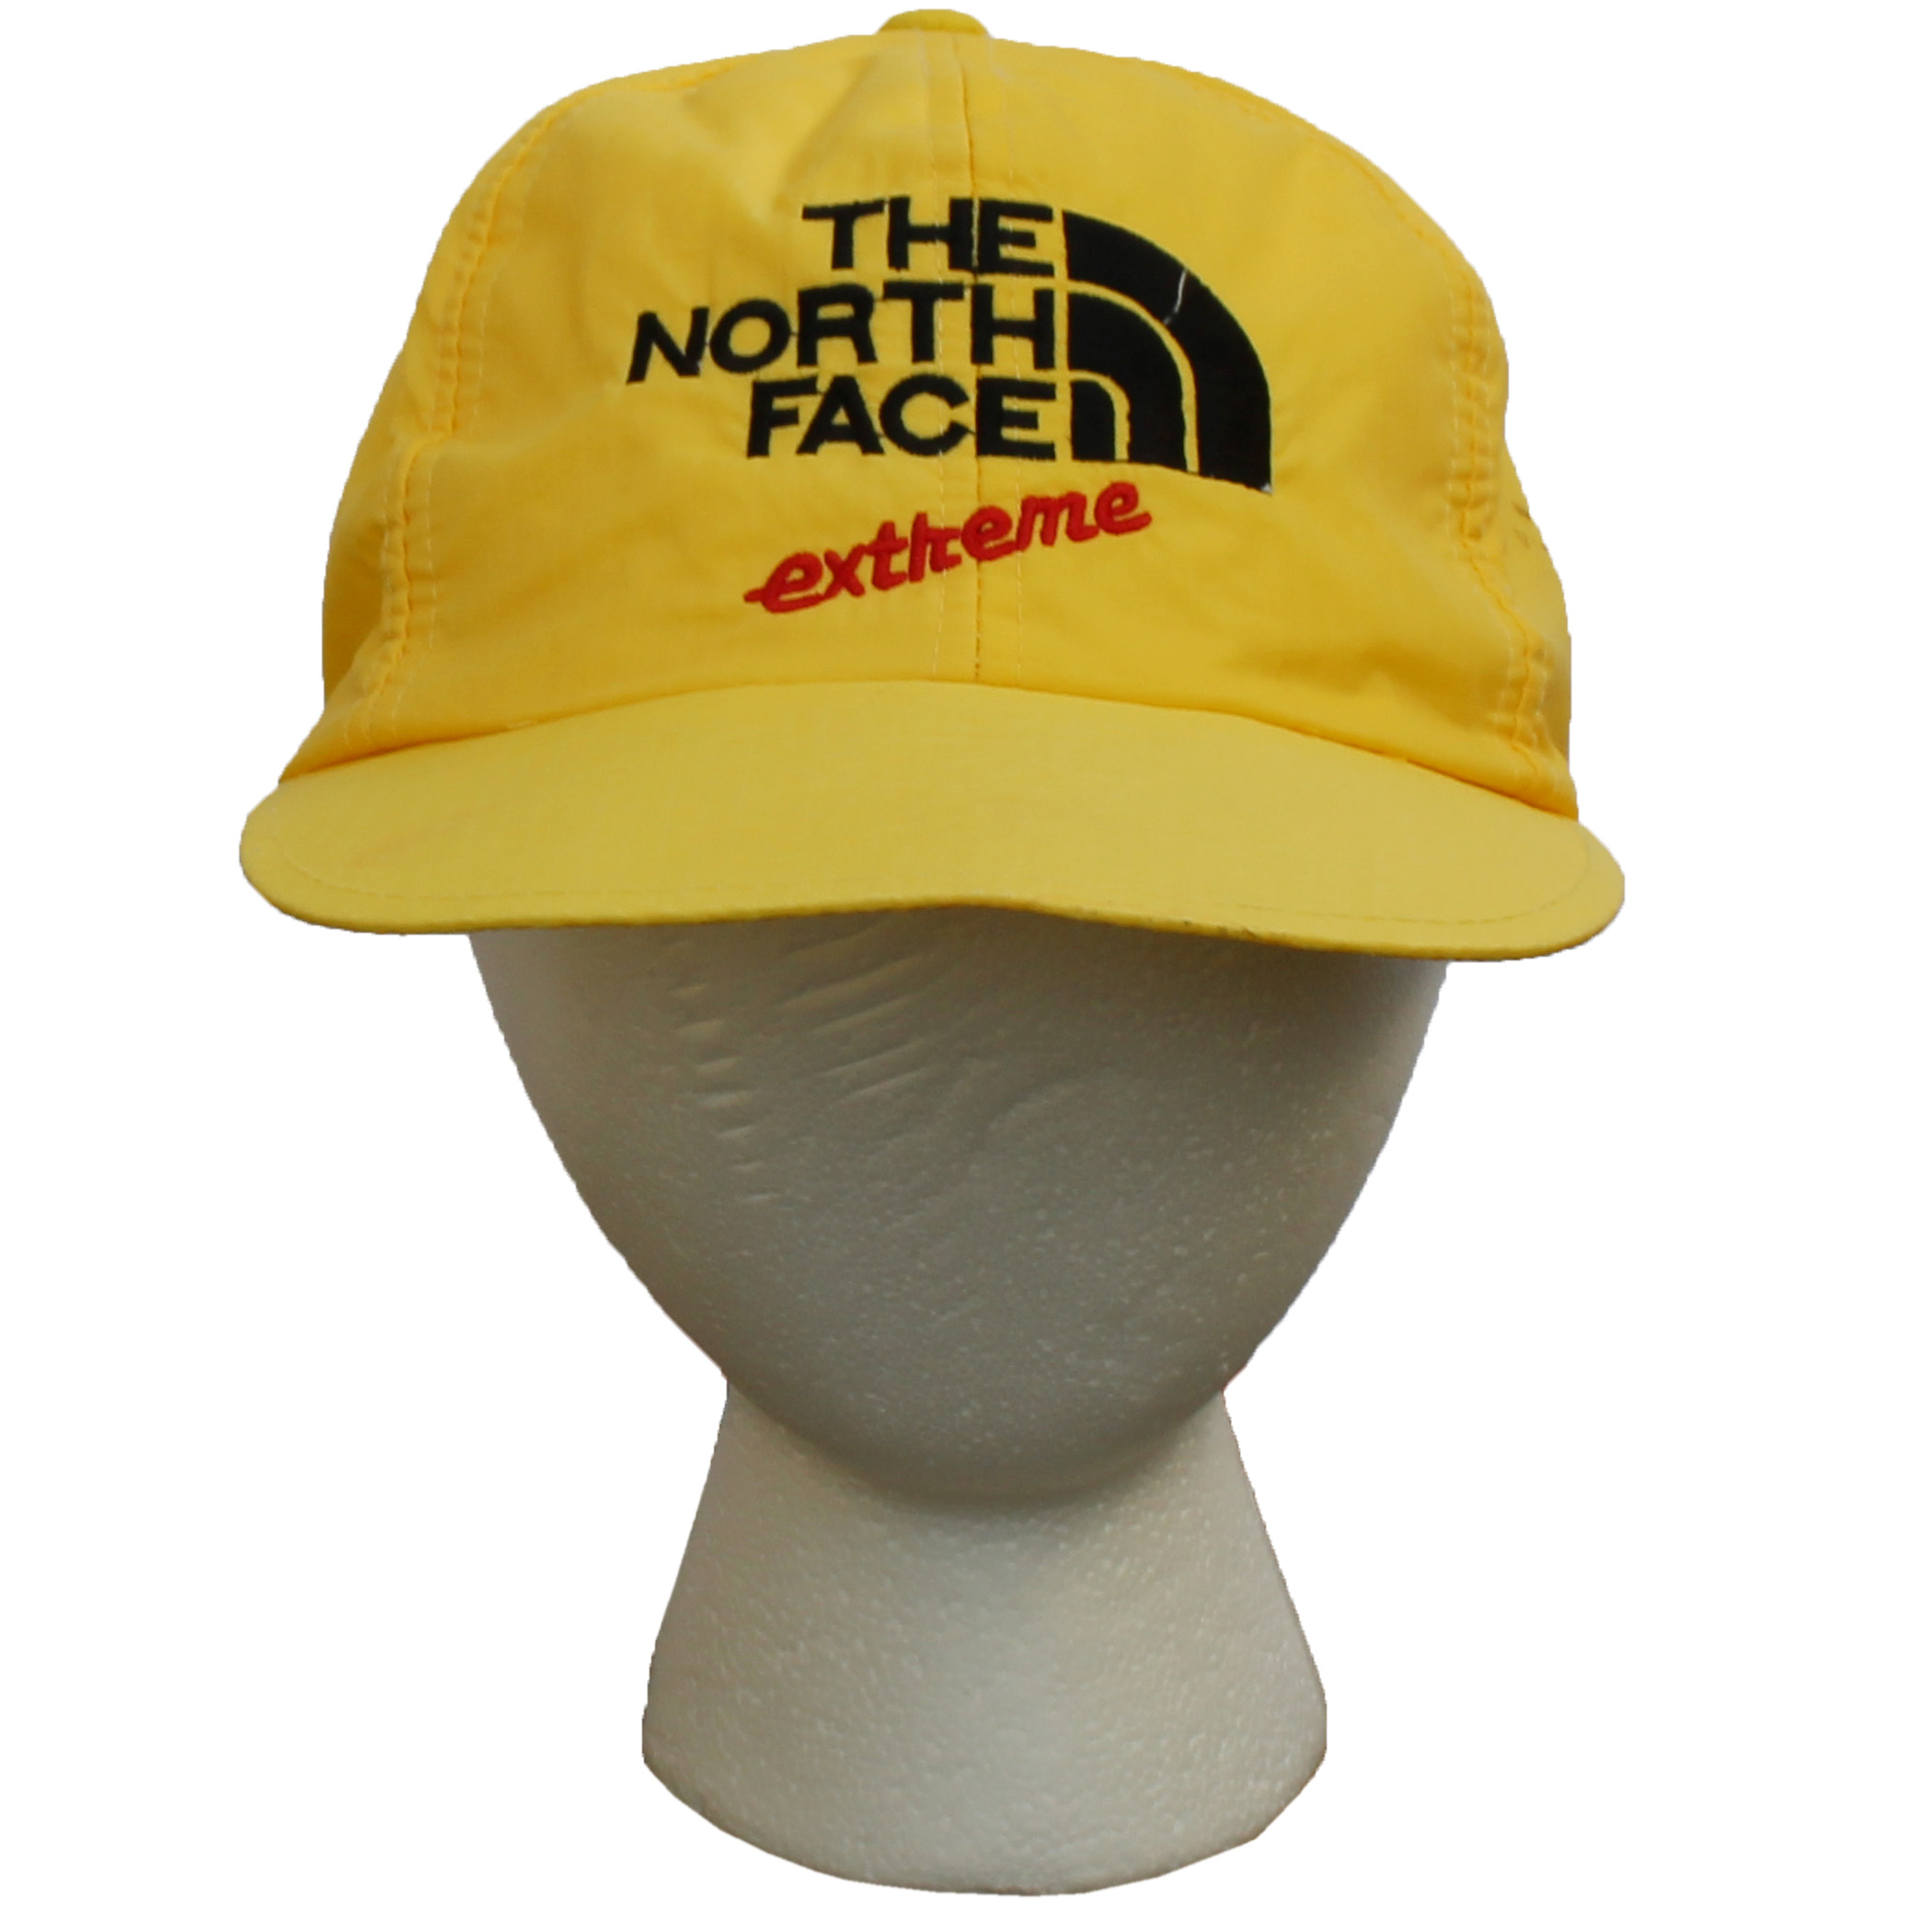 Vintage The North Face Extreme Snapback — Roots